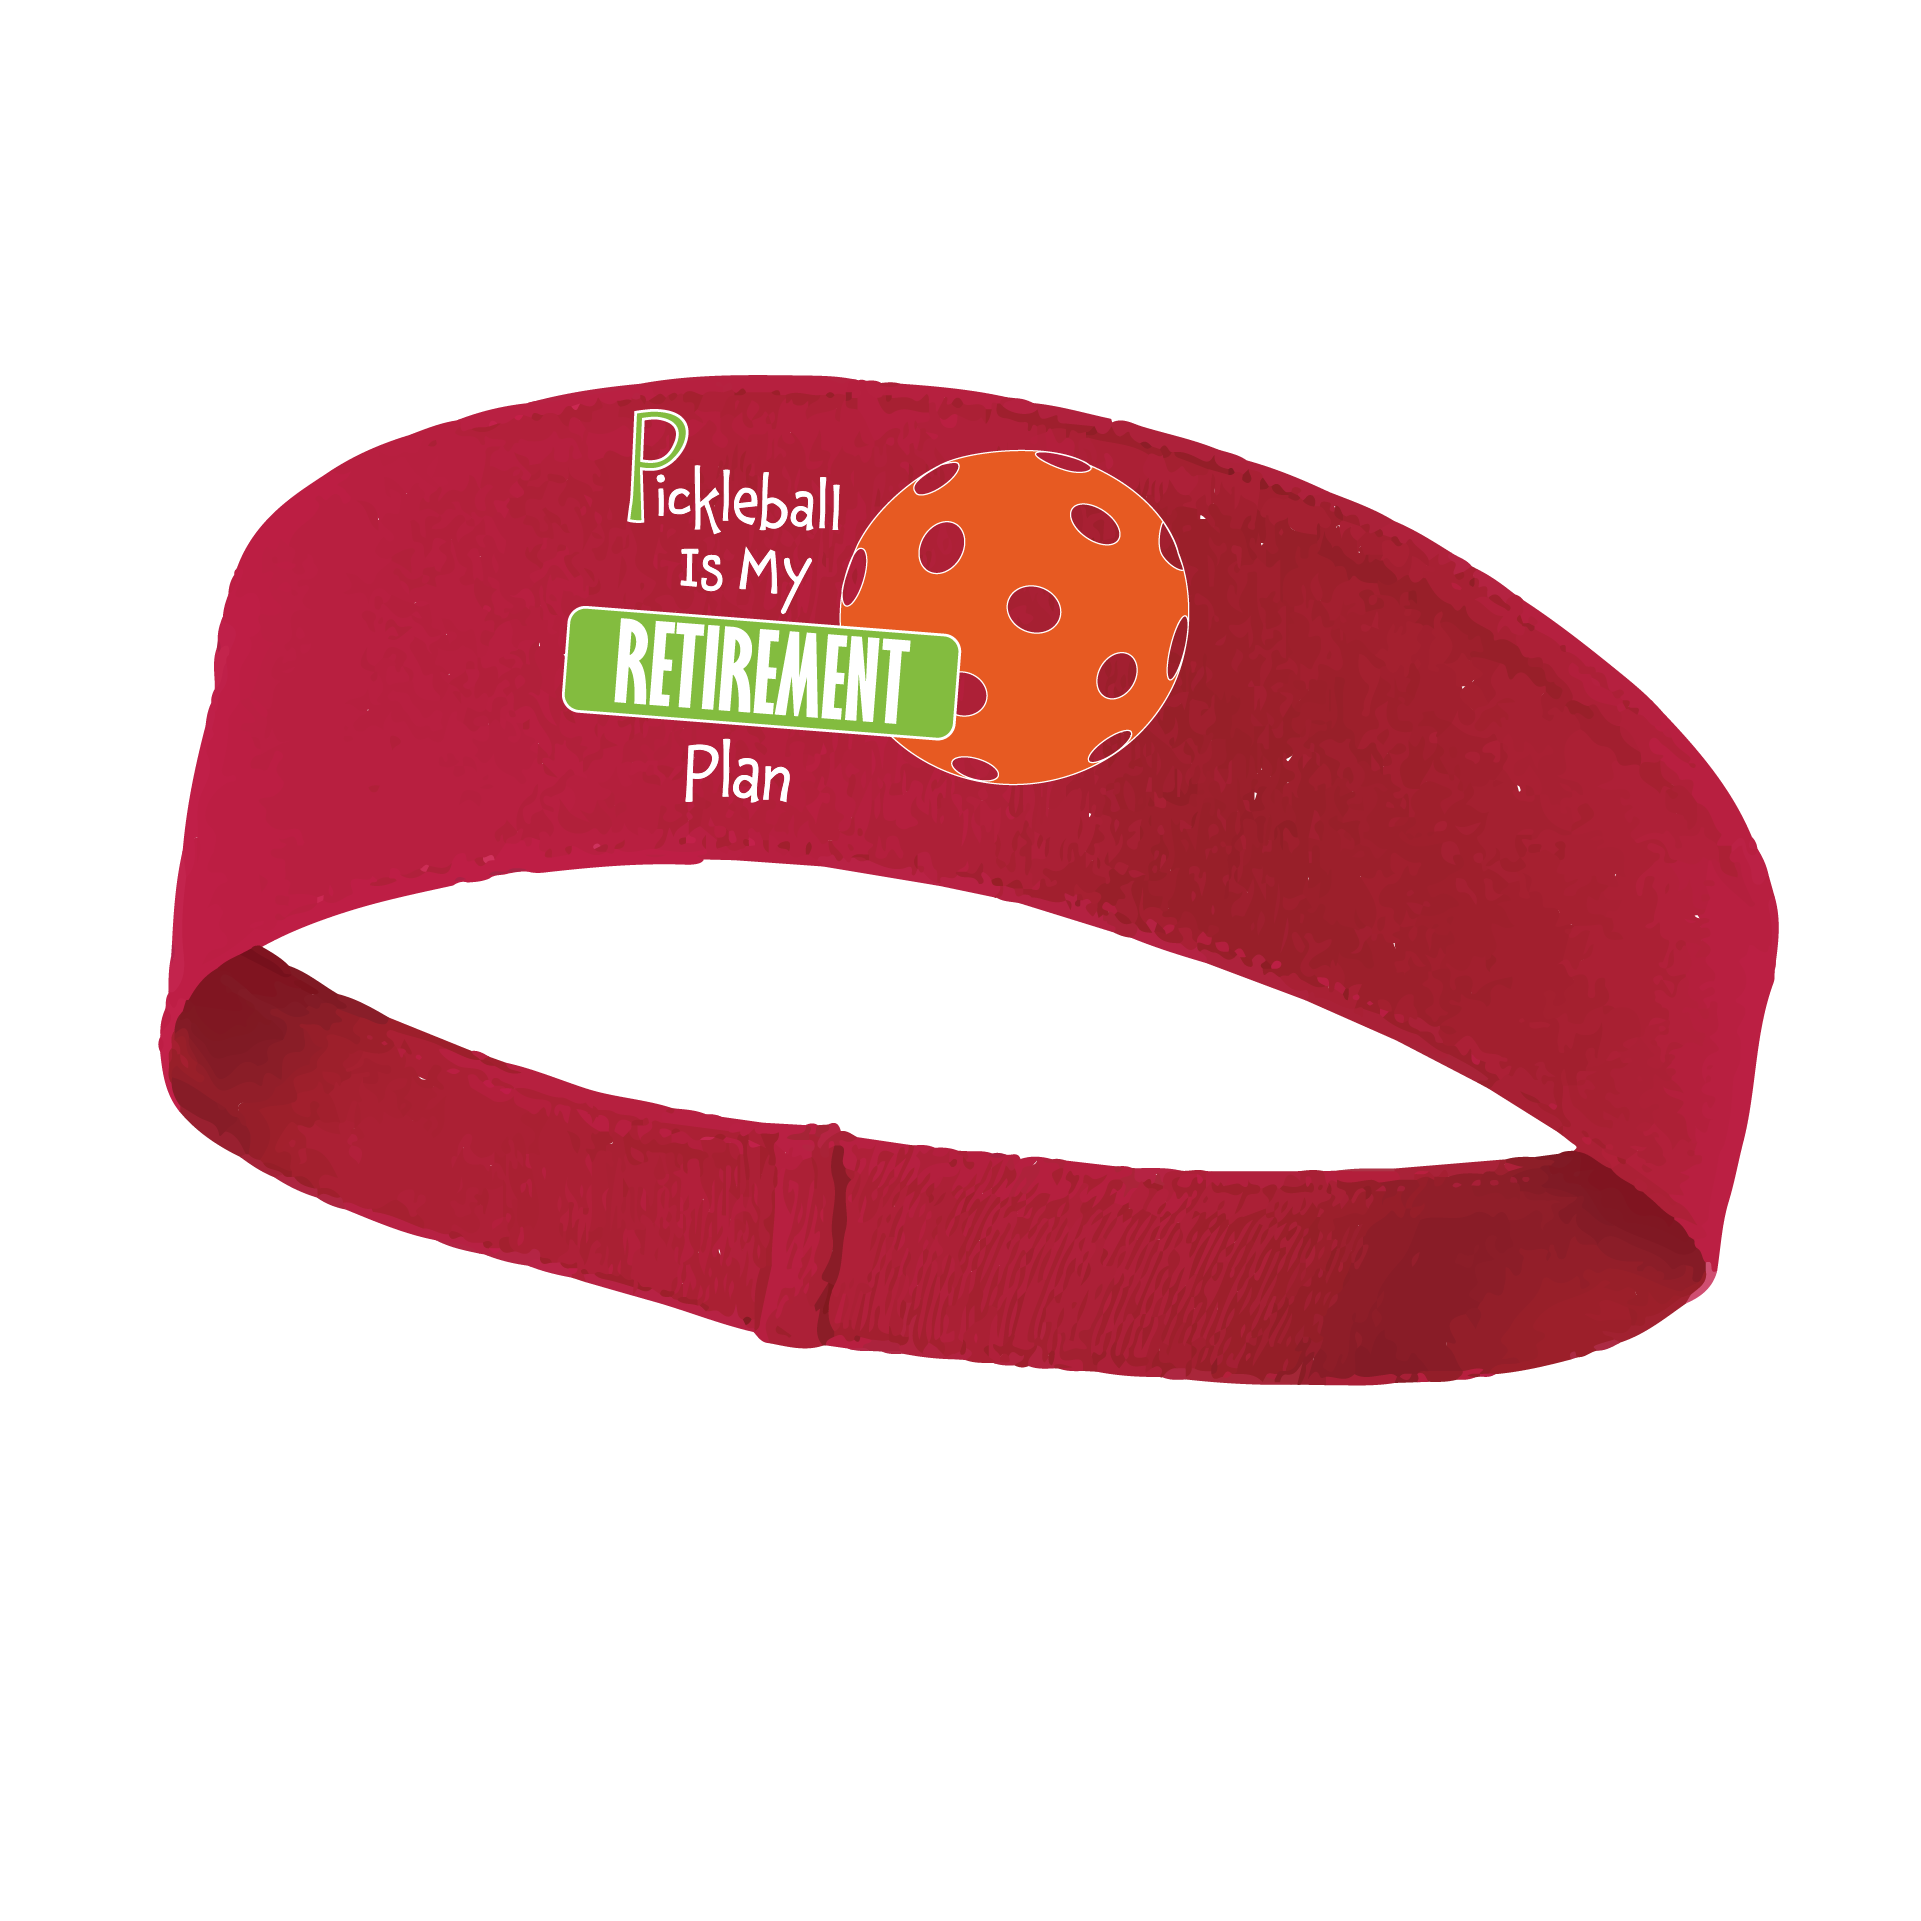 Pickleball Headband Design: Pickleball Retirement  This fun, pickleball designed, moisture-wicking headband narrows in the back to fit more securely. Single-needle top-stitched edging. These headbands come in a variety of colors. Truly shows your love for the sport of pickleball!!